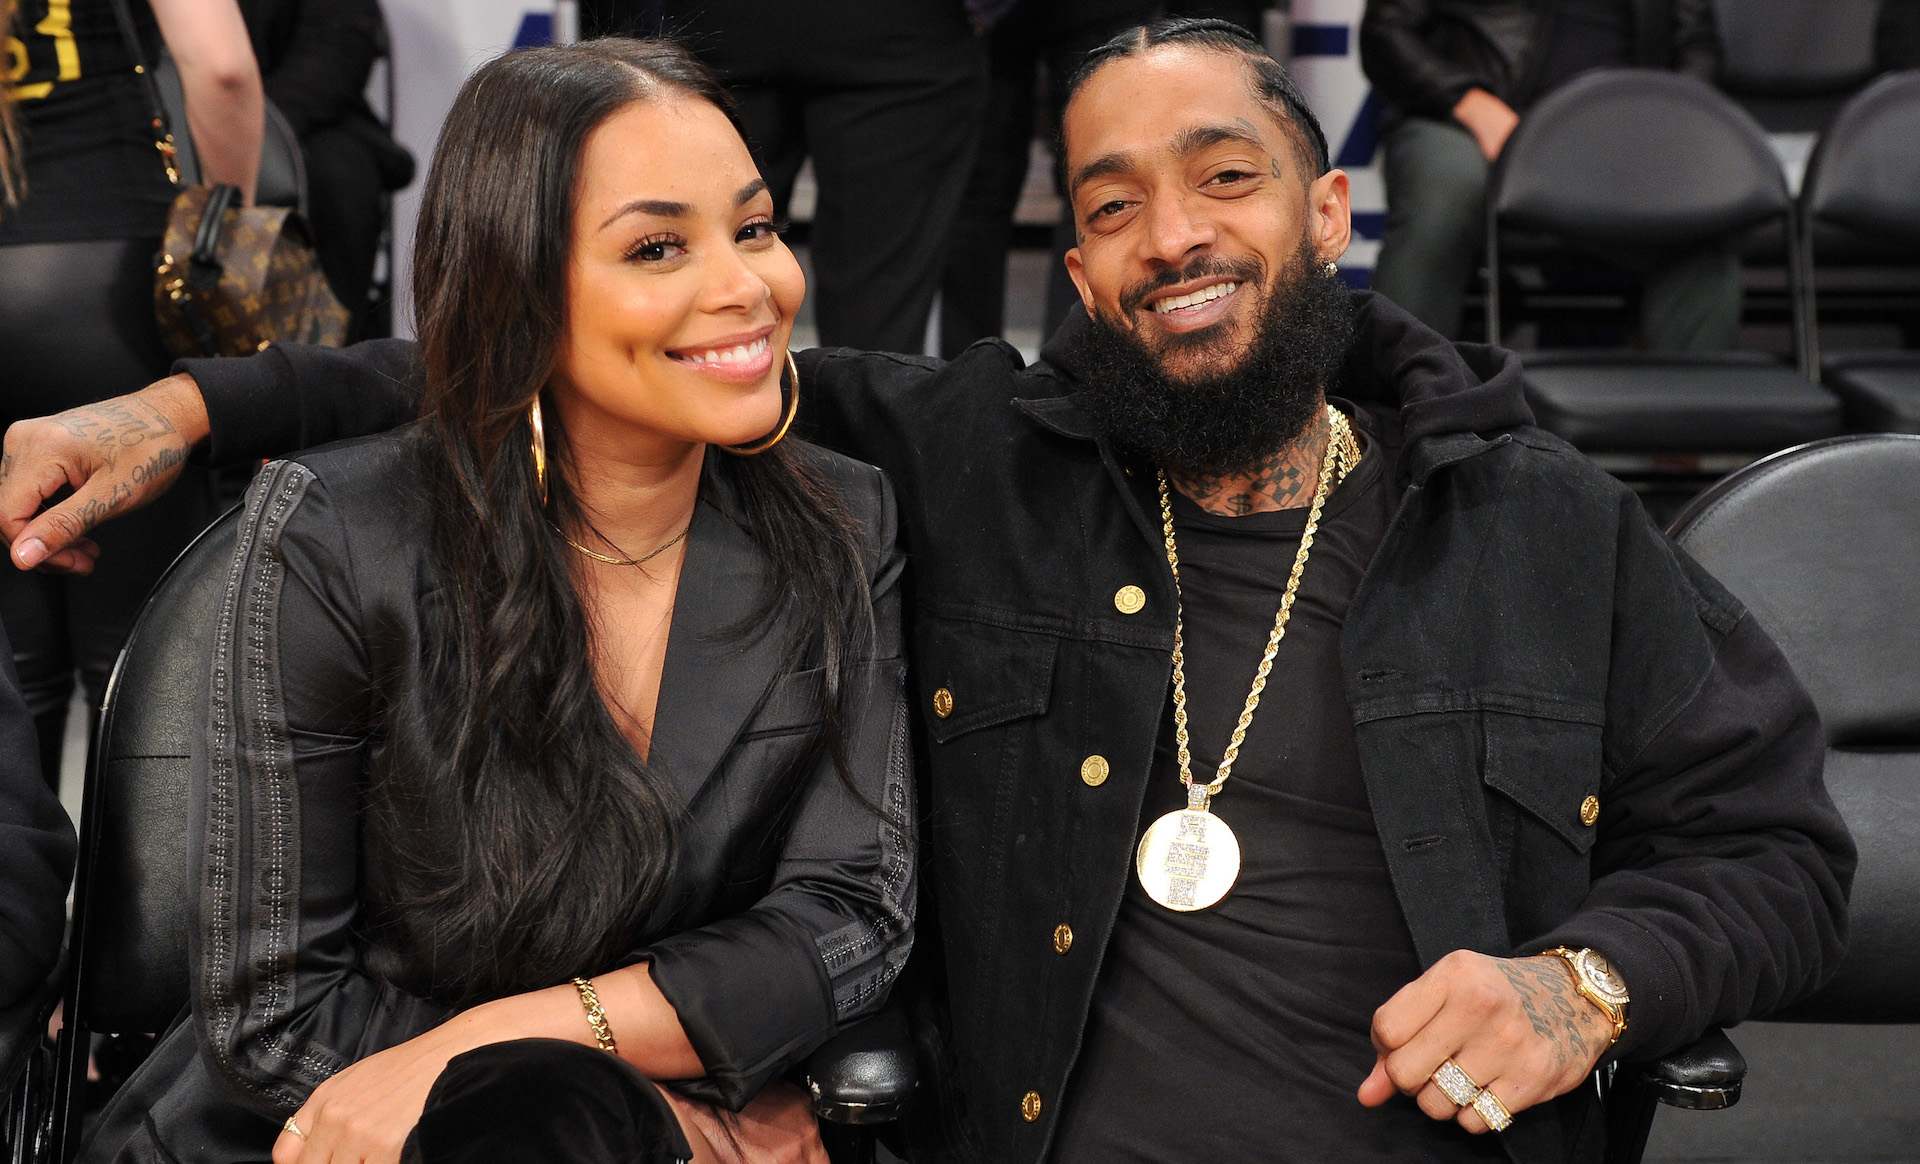 Today we honor you King'- Lauren London remembers her late partner